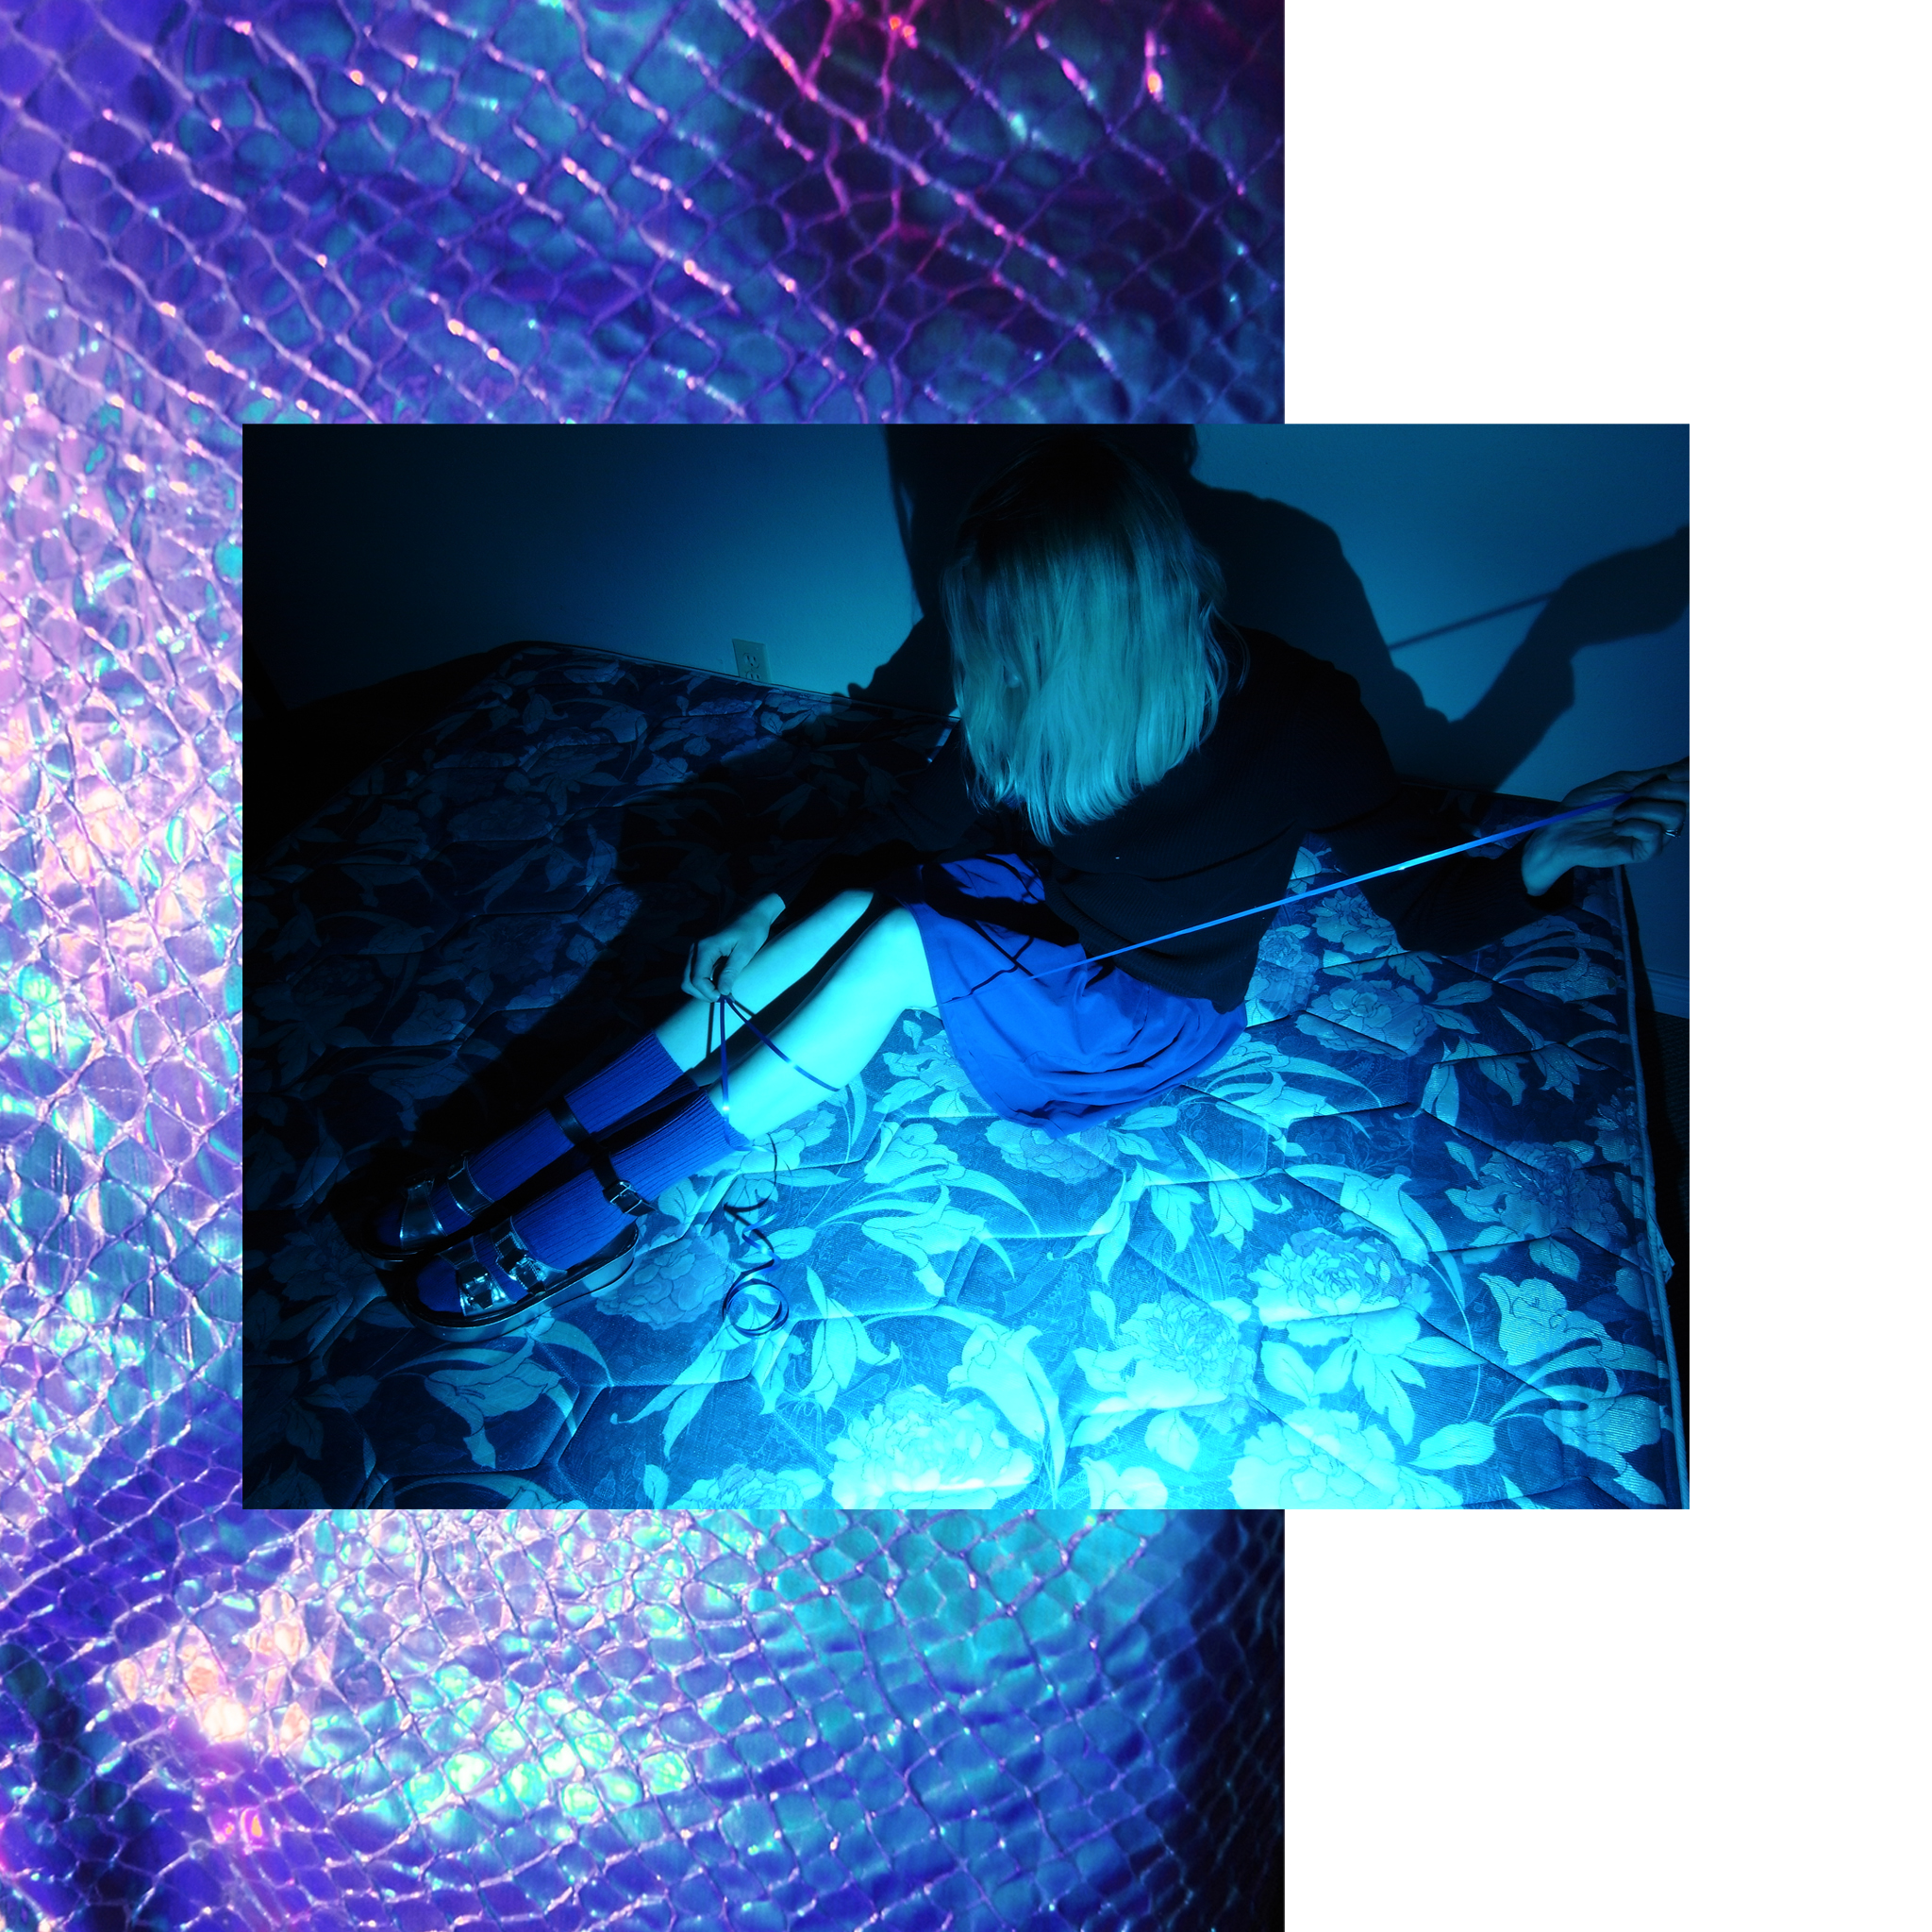 Layered image with a portrait of a girl in blue light on exposed mattress, layered on purple plastic